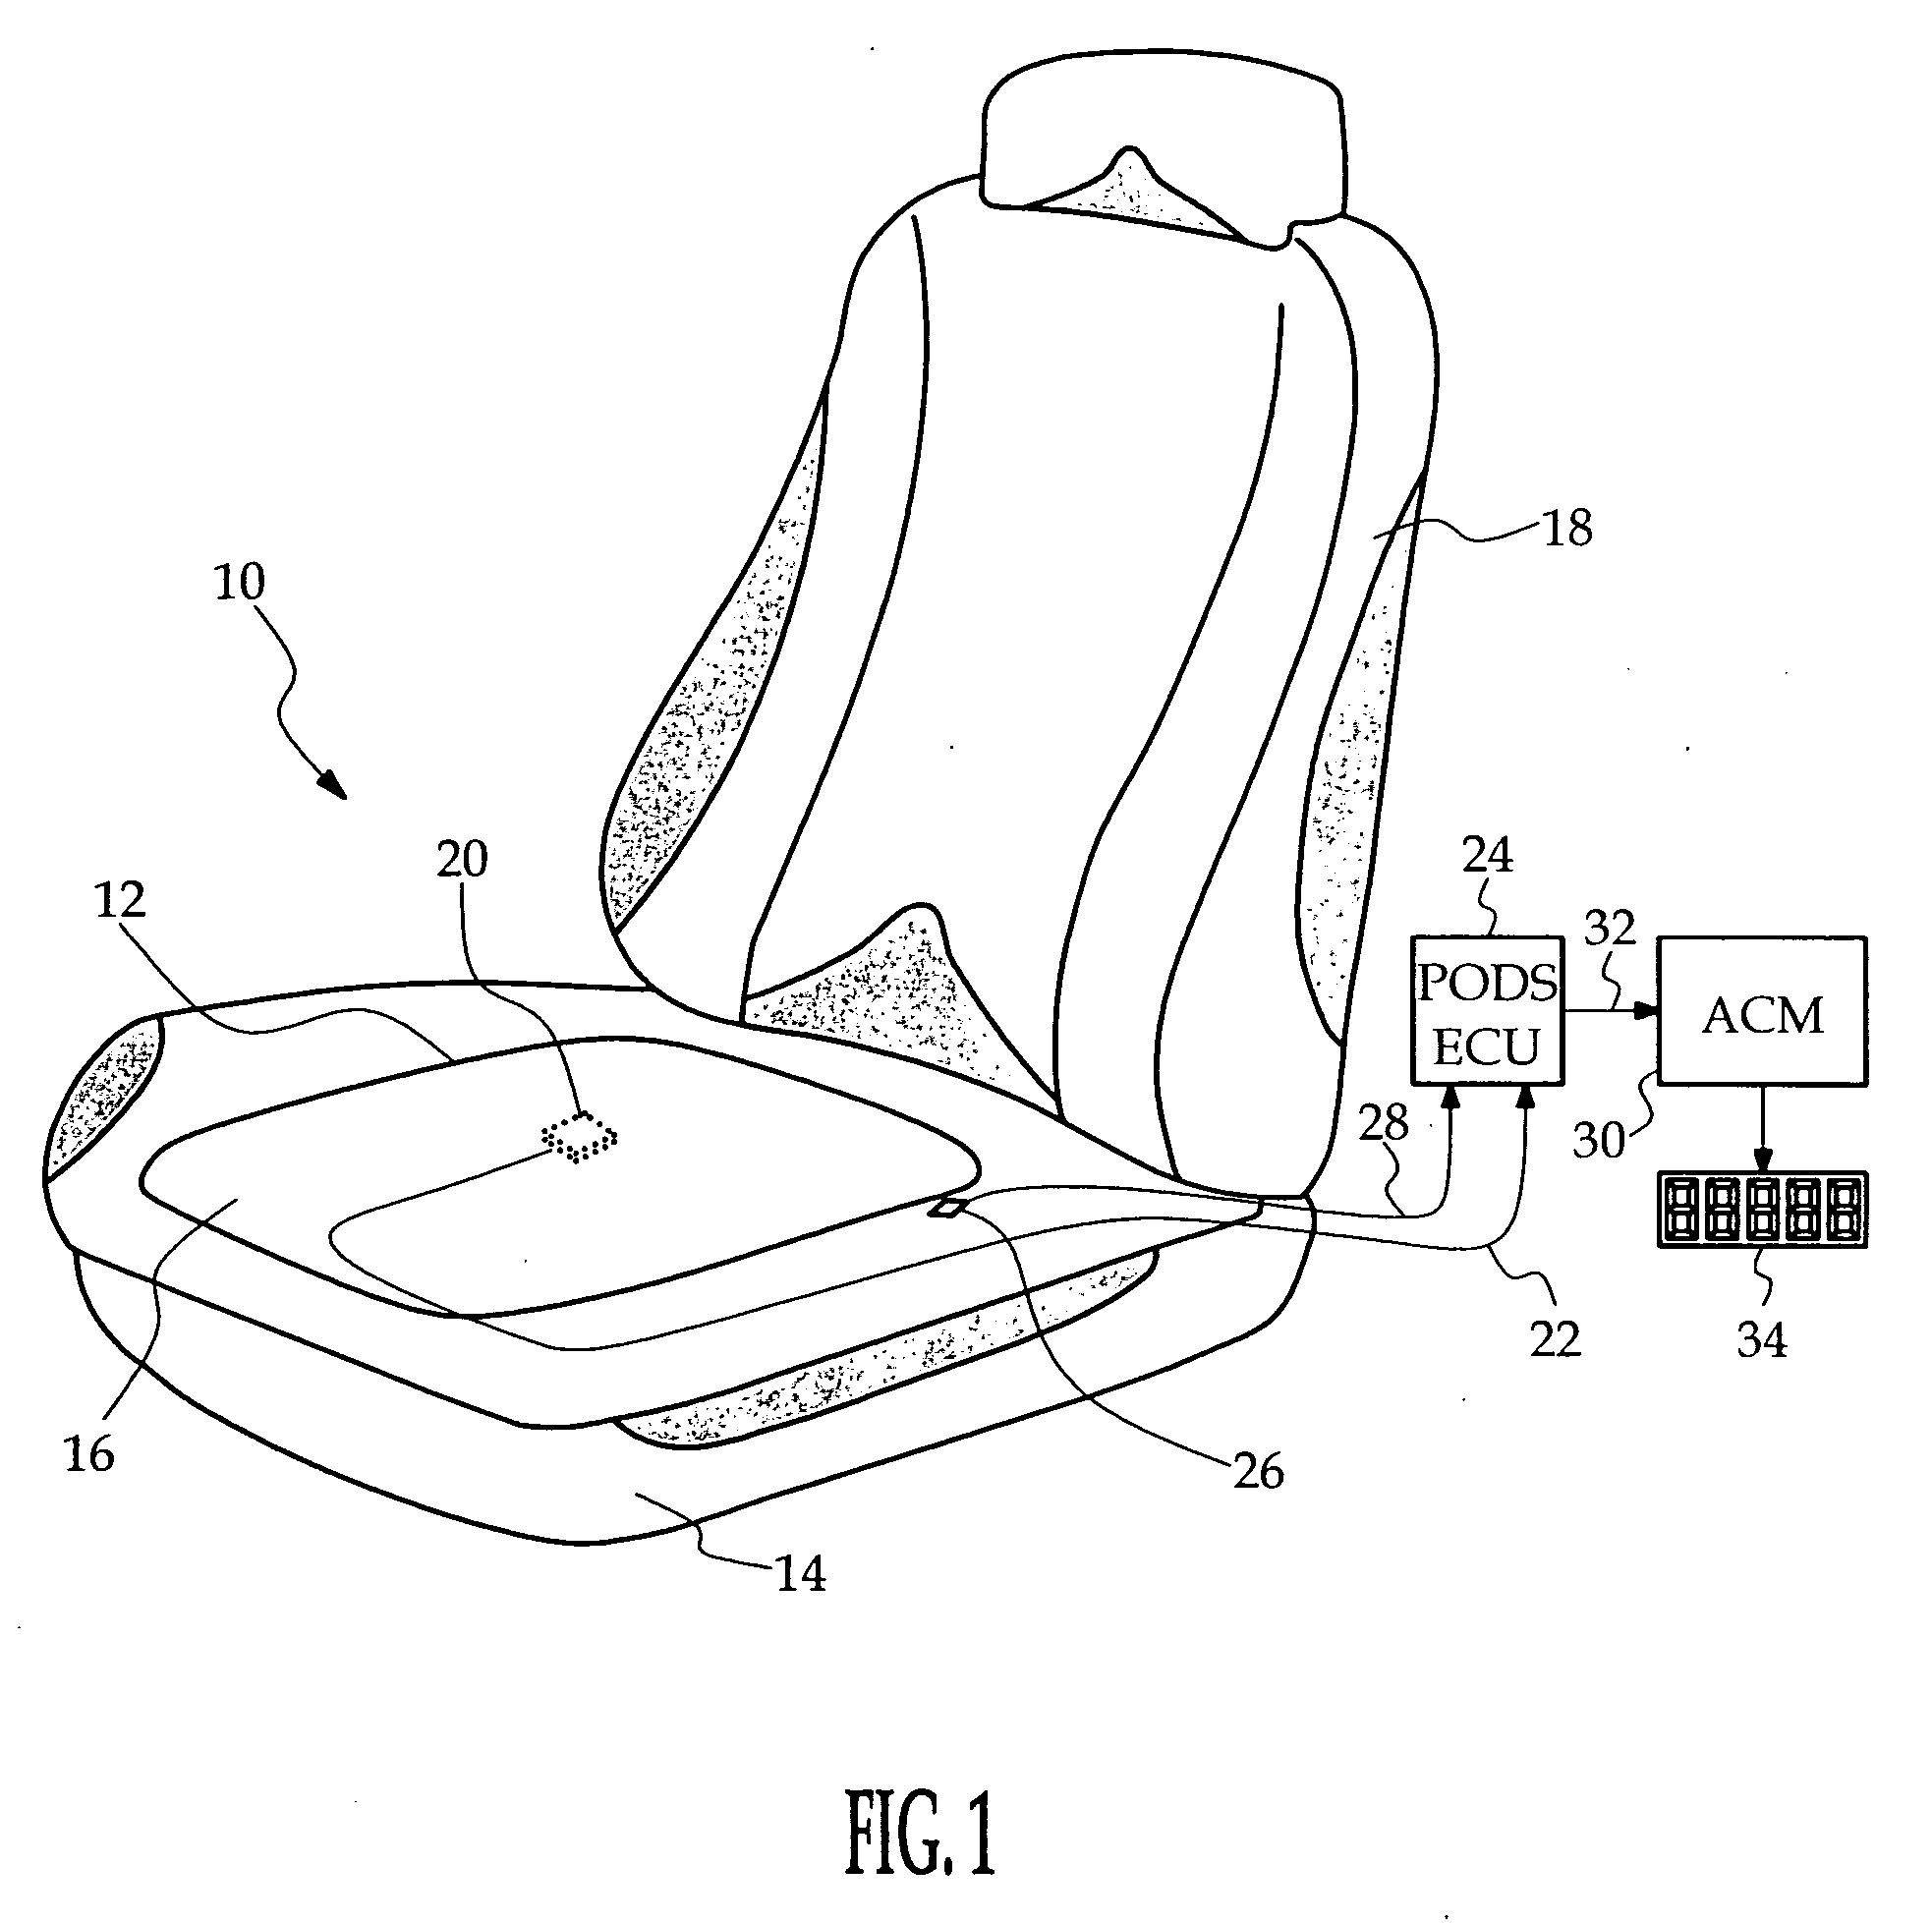 Method of characterizing an adult occupant of a vehicle seat based on a measure of seated weight